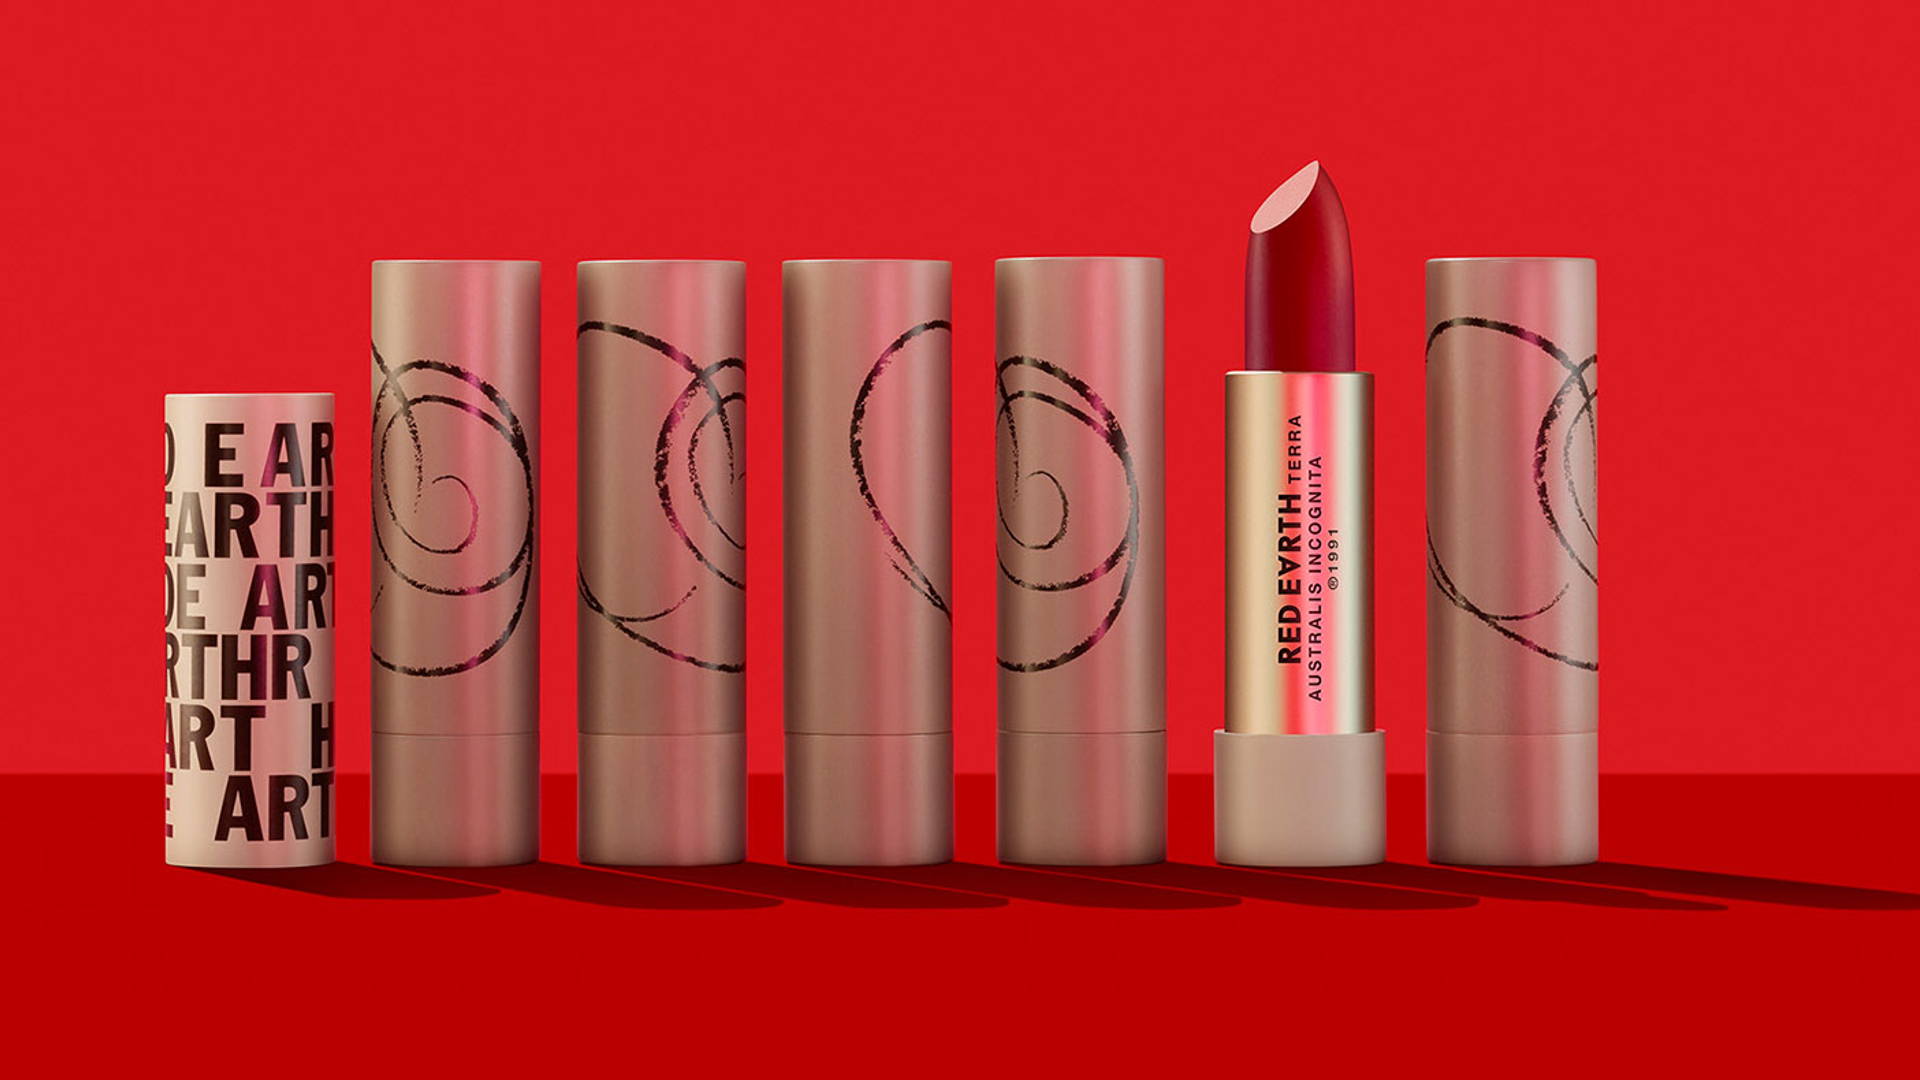 junk henvise definitive Red Earth Cosmetics Gets a Dynamic and Vibrant New Look | Dieline - Design,  Branding & Packaging Inspiration